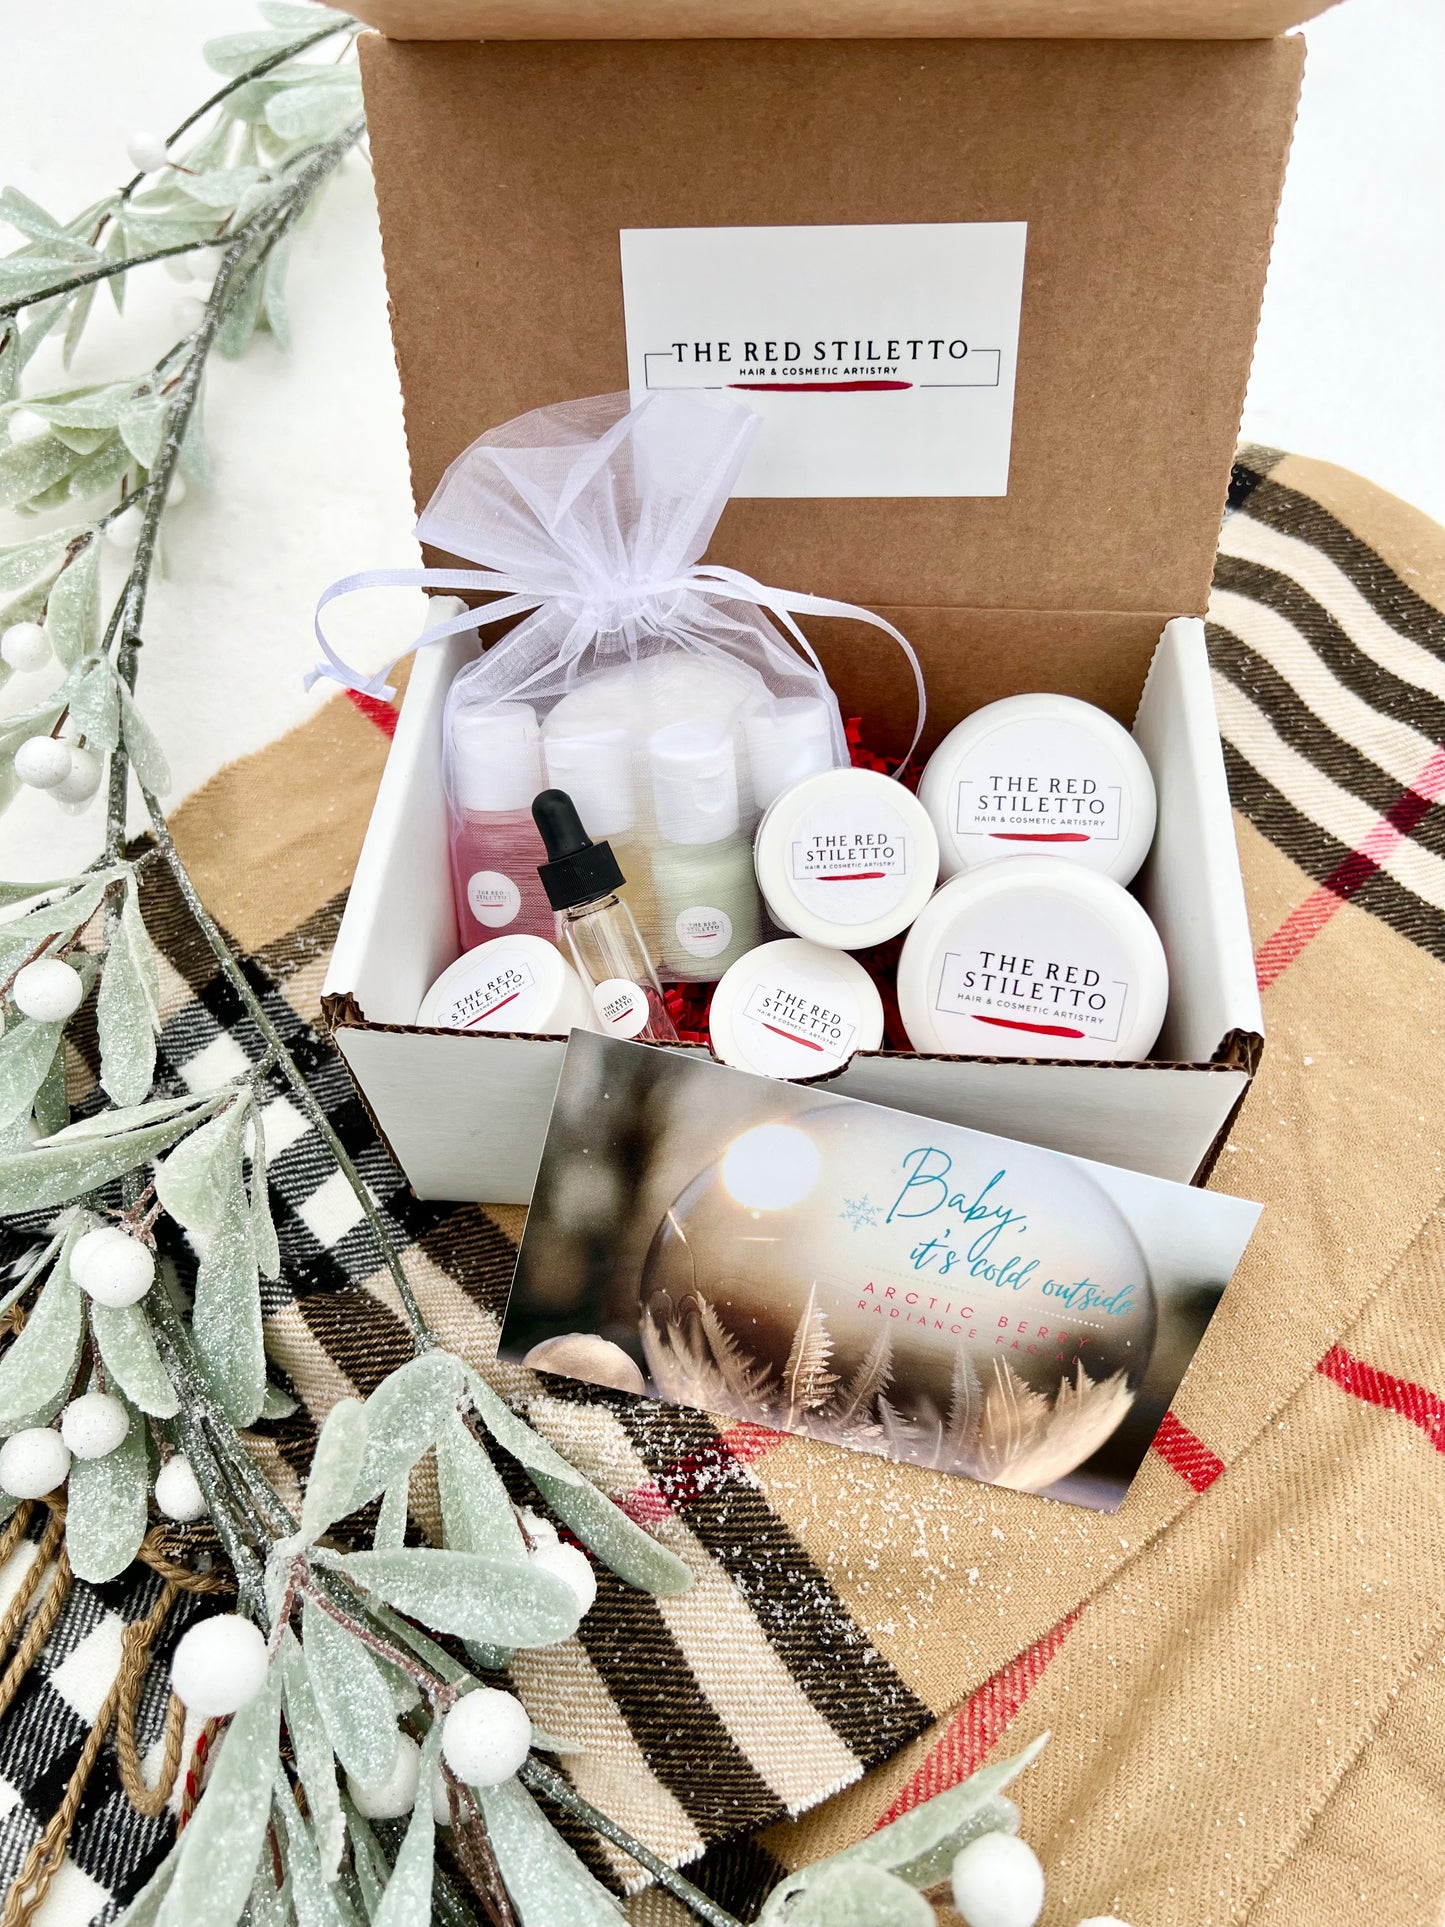 Monthly Facial Subscription Box